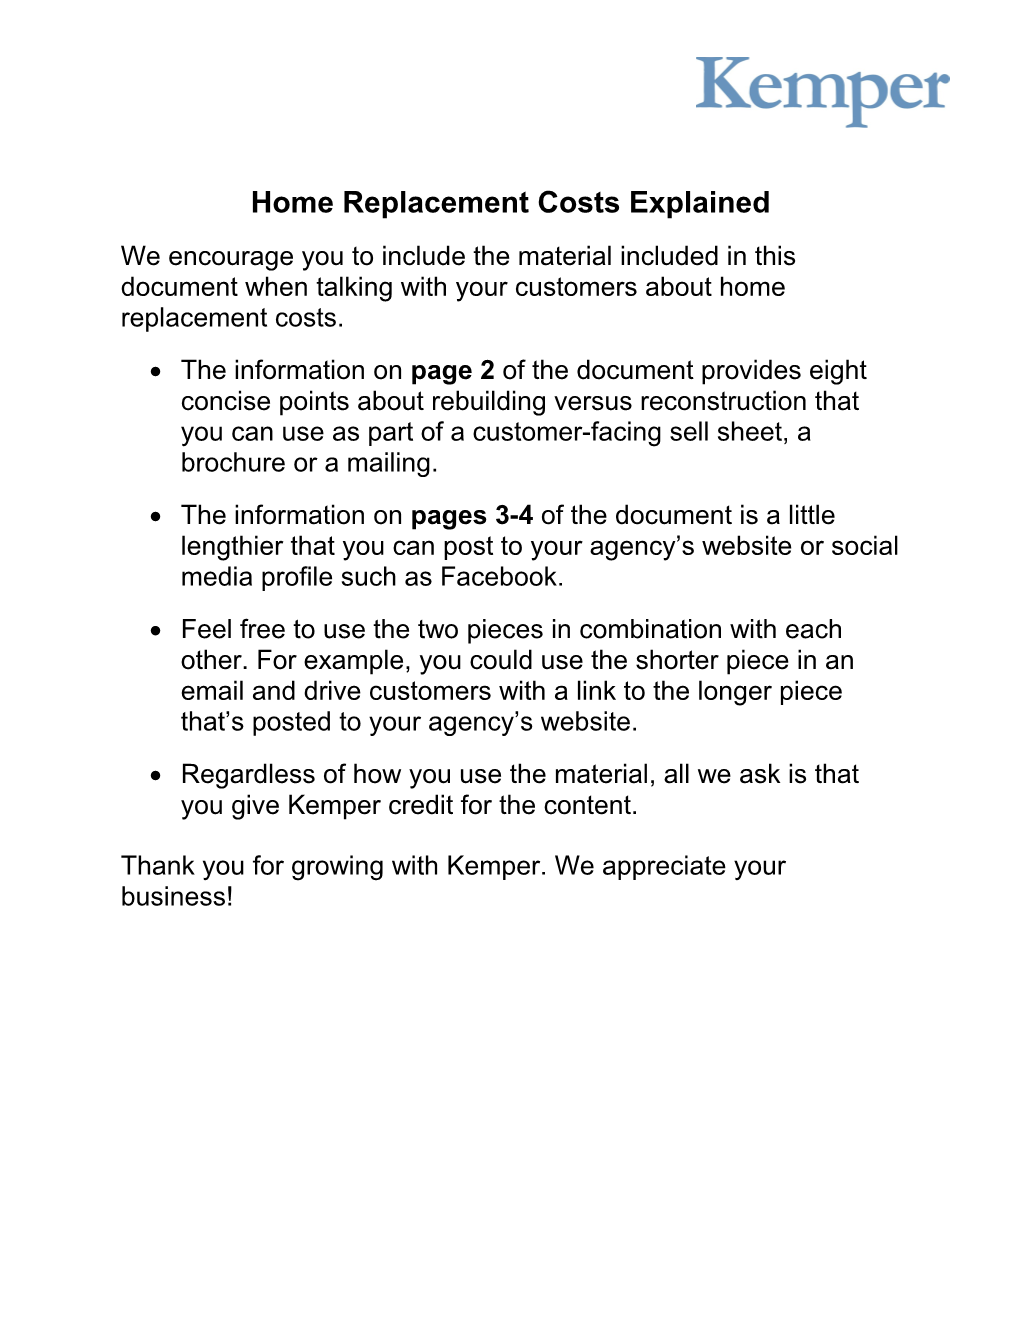 Home Replacement Costs Explained